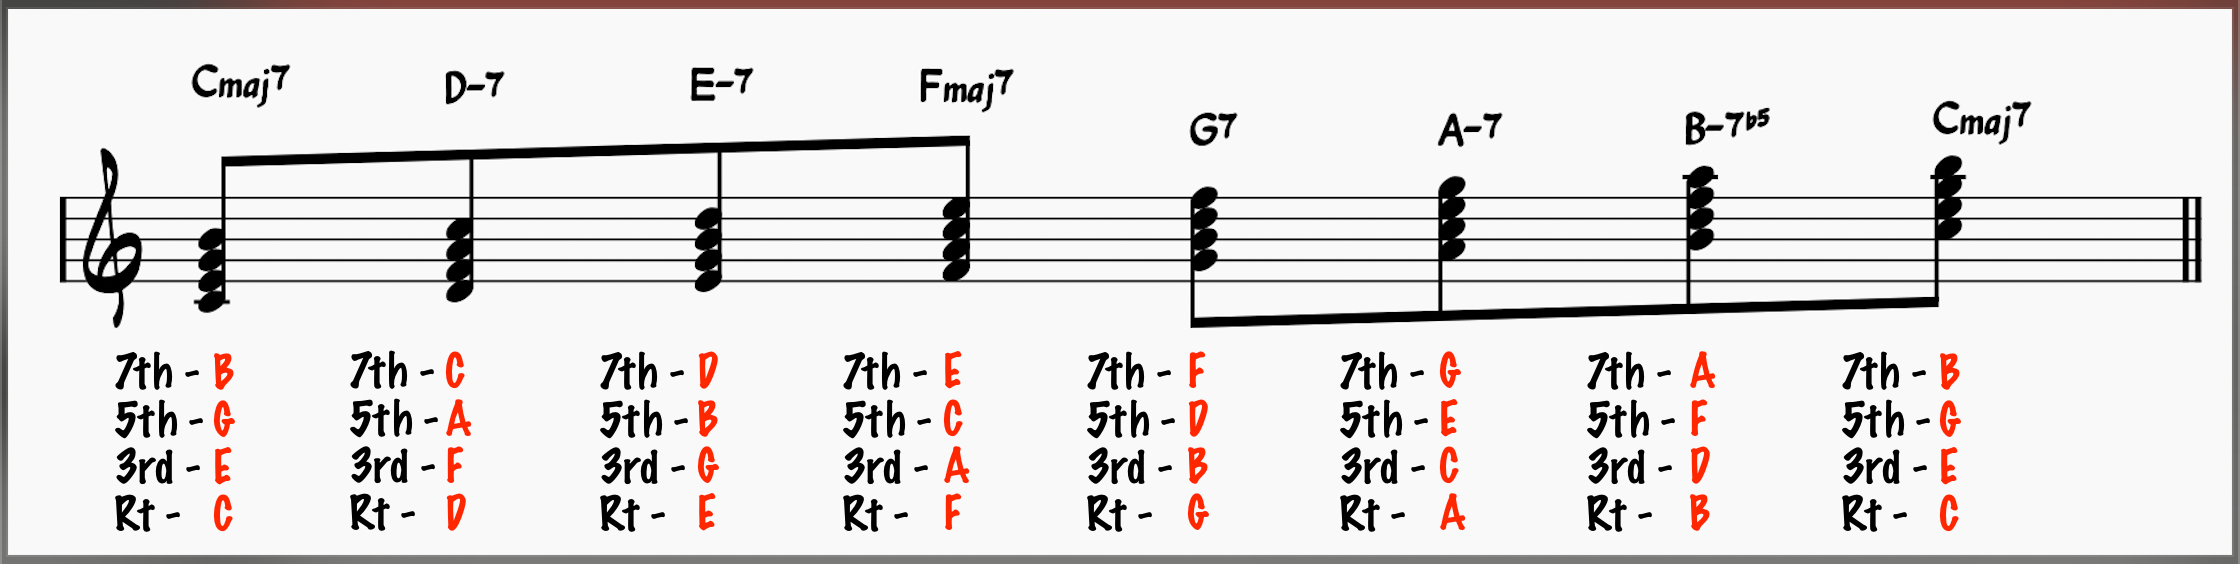 C Major scale harmonized in thirds to create 7th chords